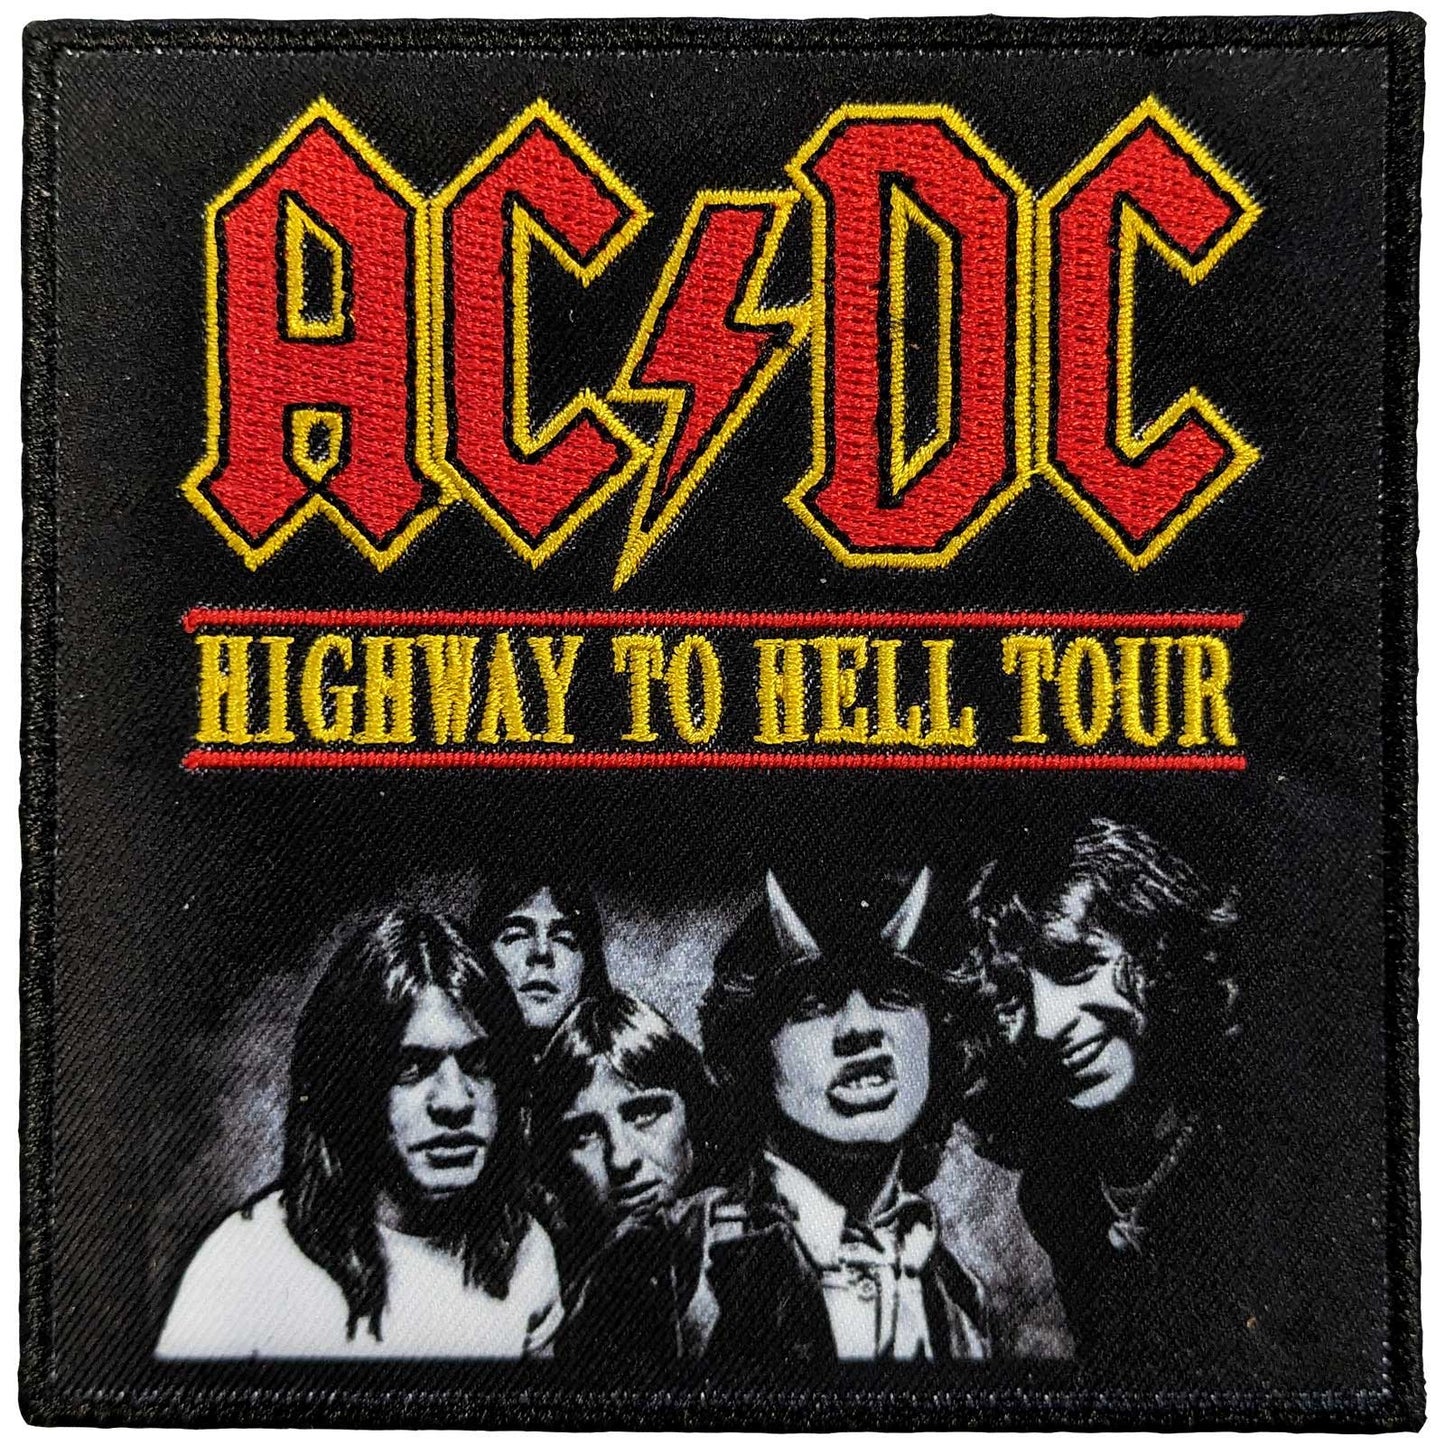 AC/DC Standard Woven Patch: Highway To Hell Tour